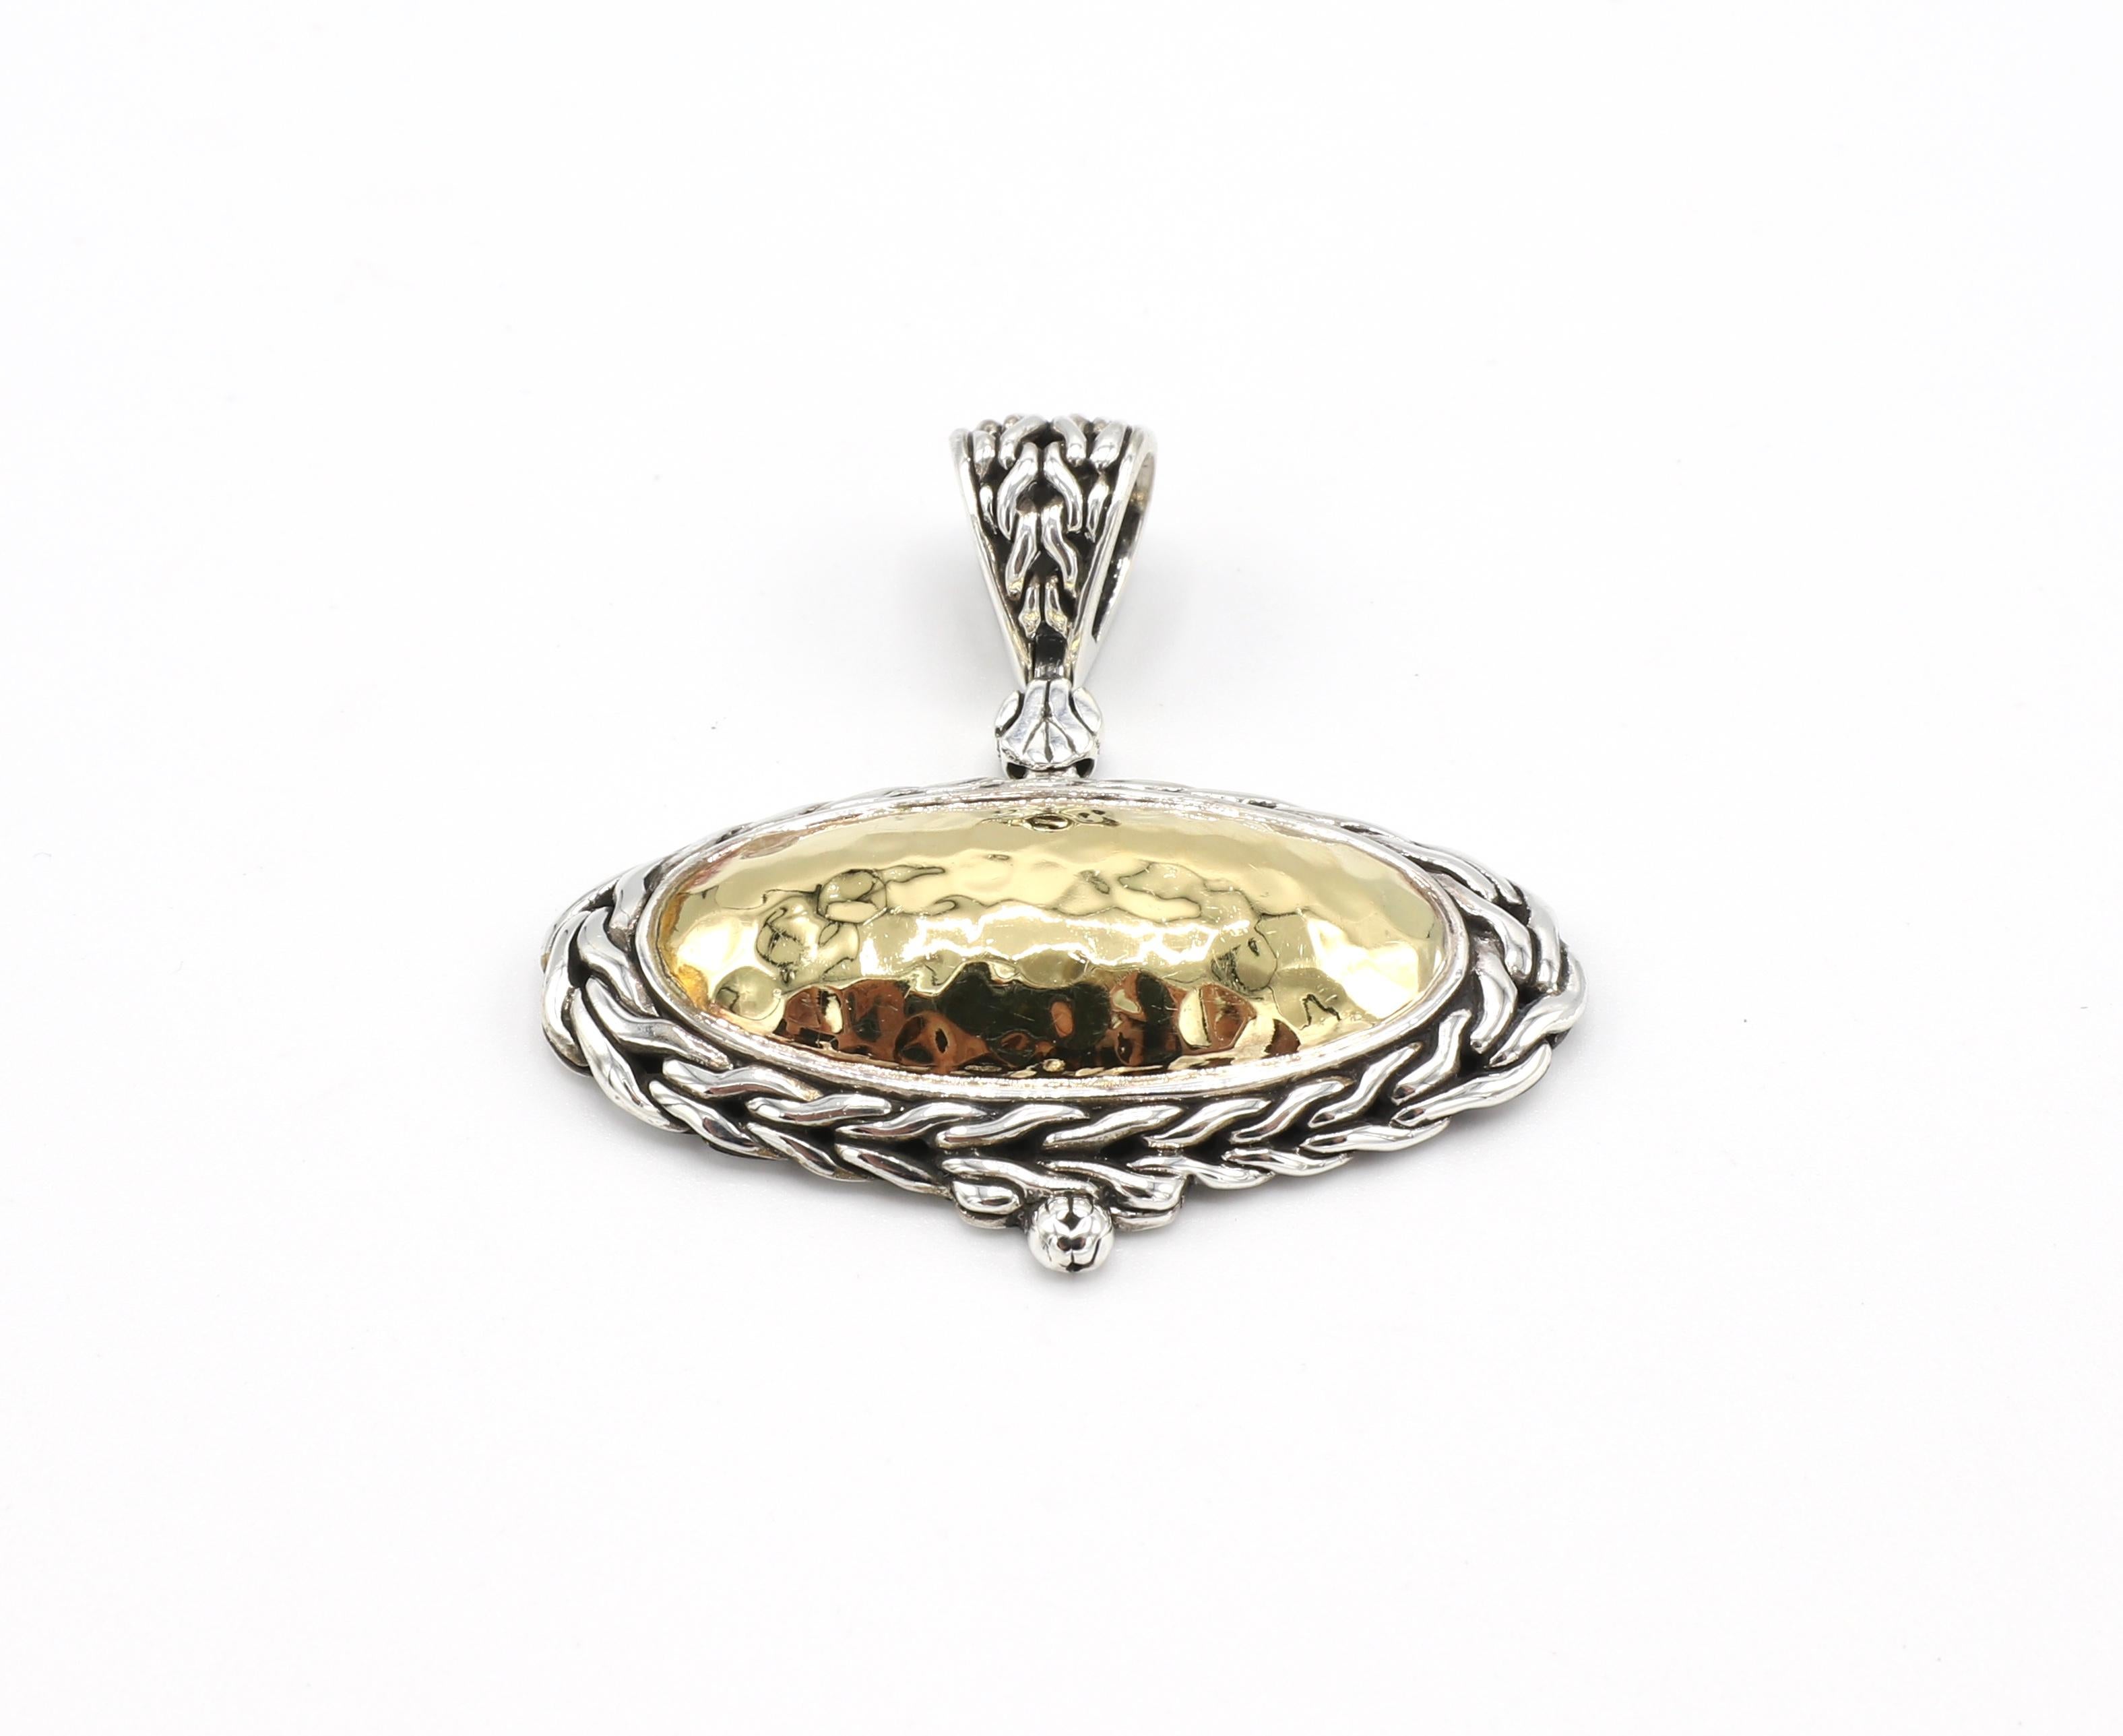 John Hardy Palu Oval Sterling Silver & 22K Gold Hammered Pendant

Metal: Sterling silver & 22k yellow gold
Weight: 14.1 grams
Length (including bale) Approx. 1.5 inches
Width: Approx. 1.6 inches
Signed: 22k 925 JH hallmark
Pendant only